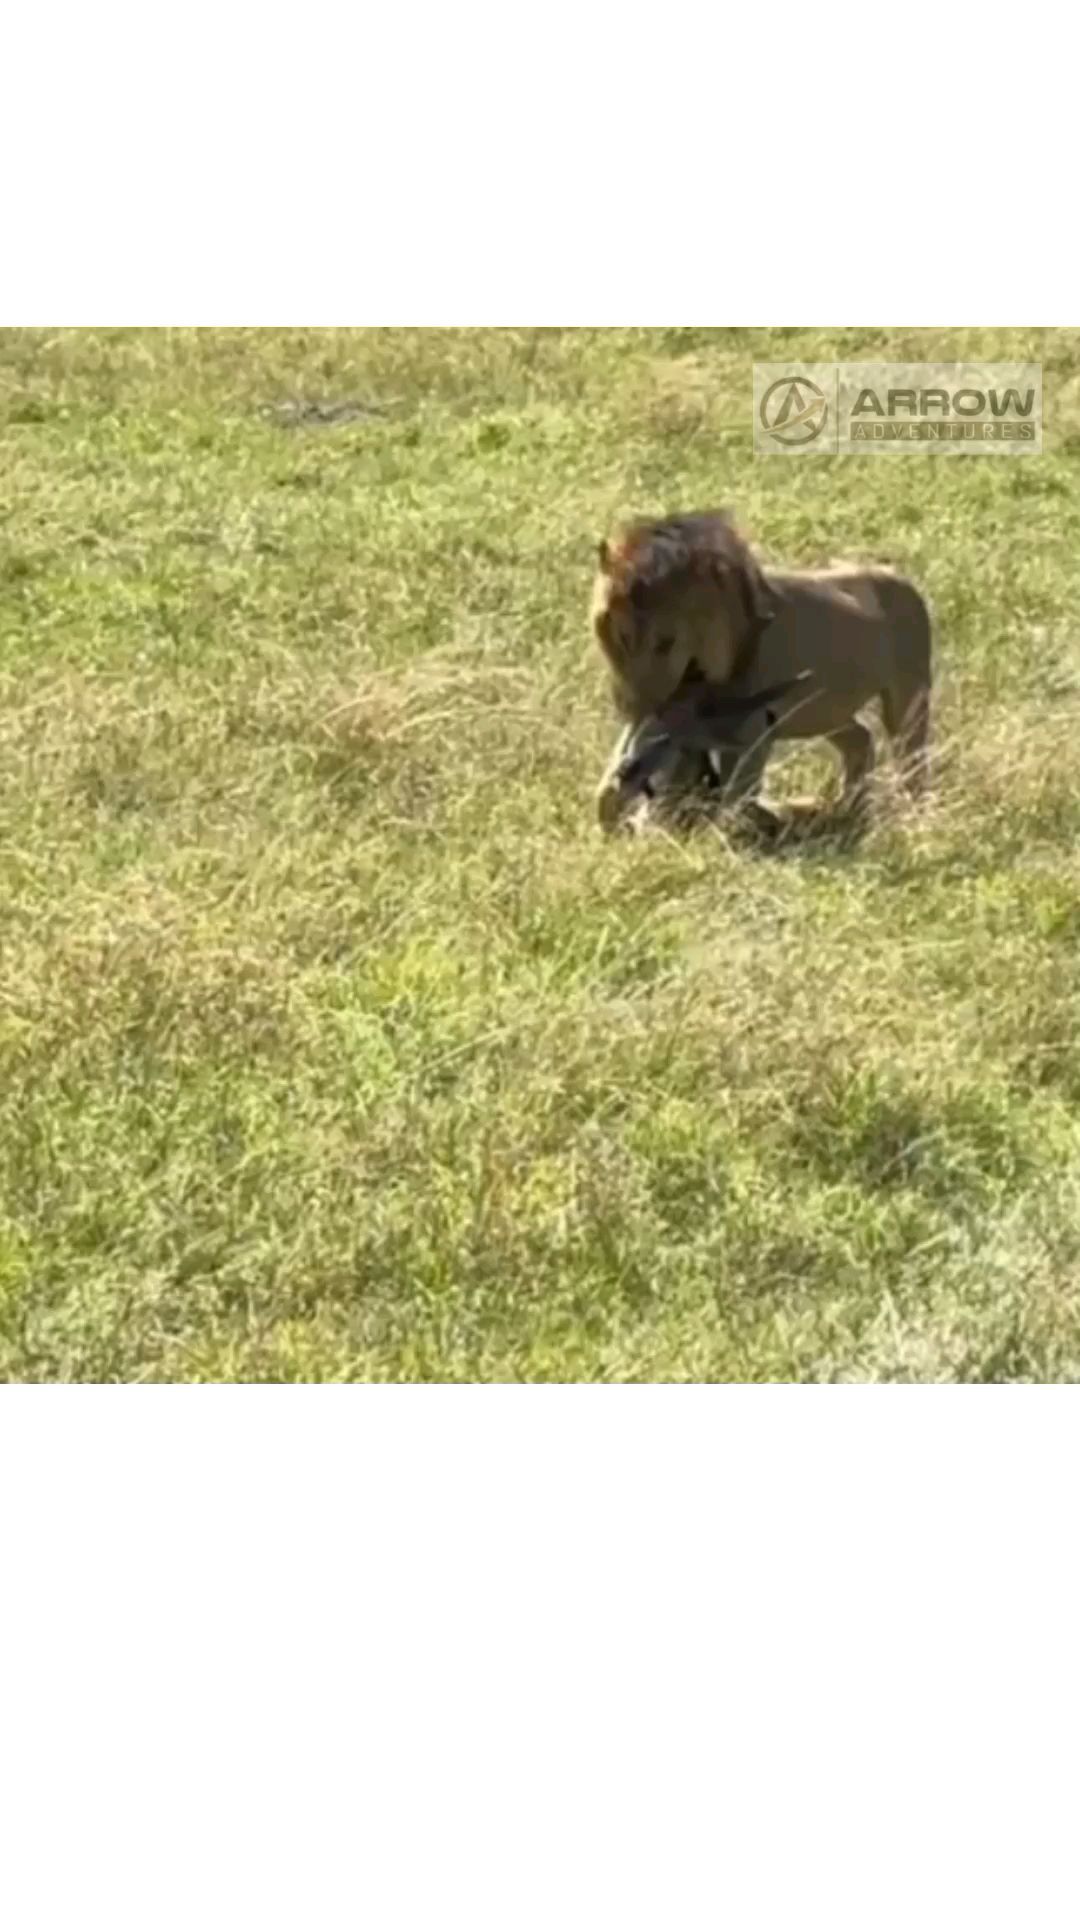 A lion dragging the kill to safety